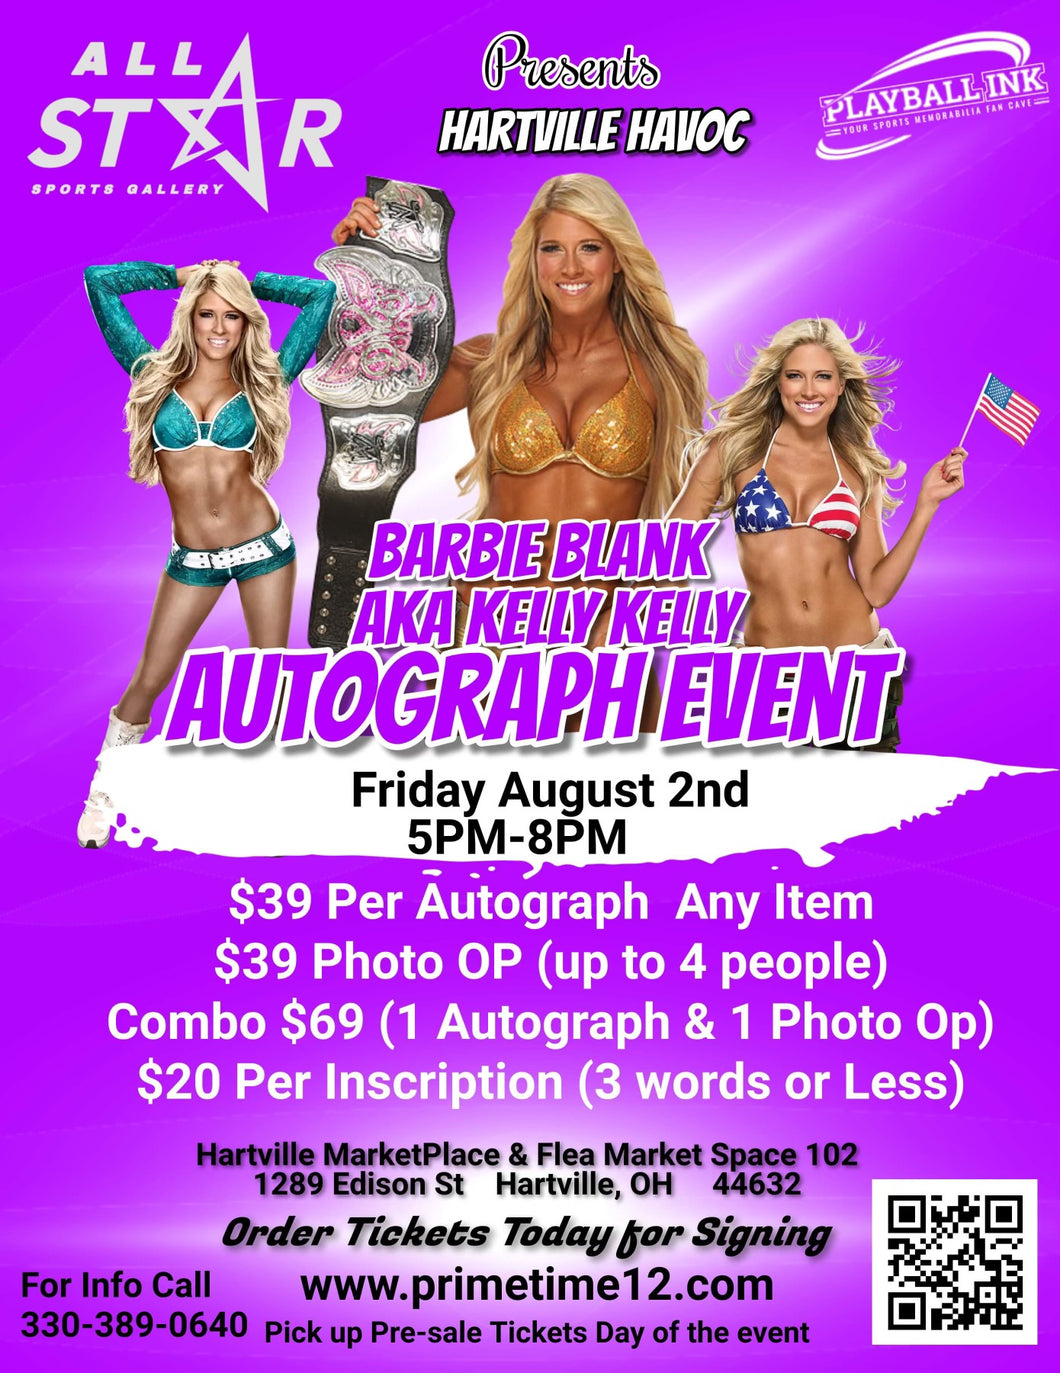 Barbie Blank AKA KELLY KELLY Pre-Sale for PHOTO OP ticket to have your photo taken with her